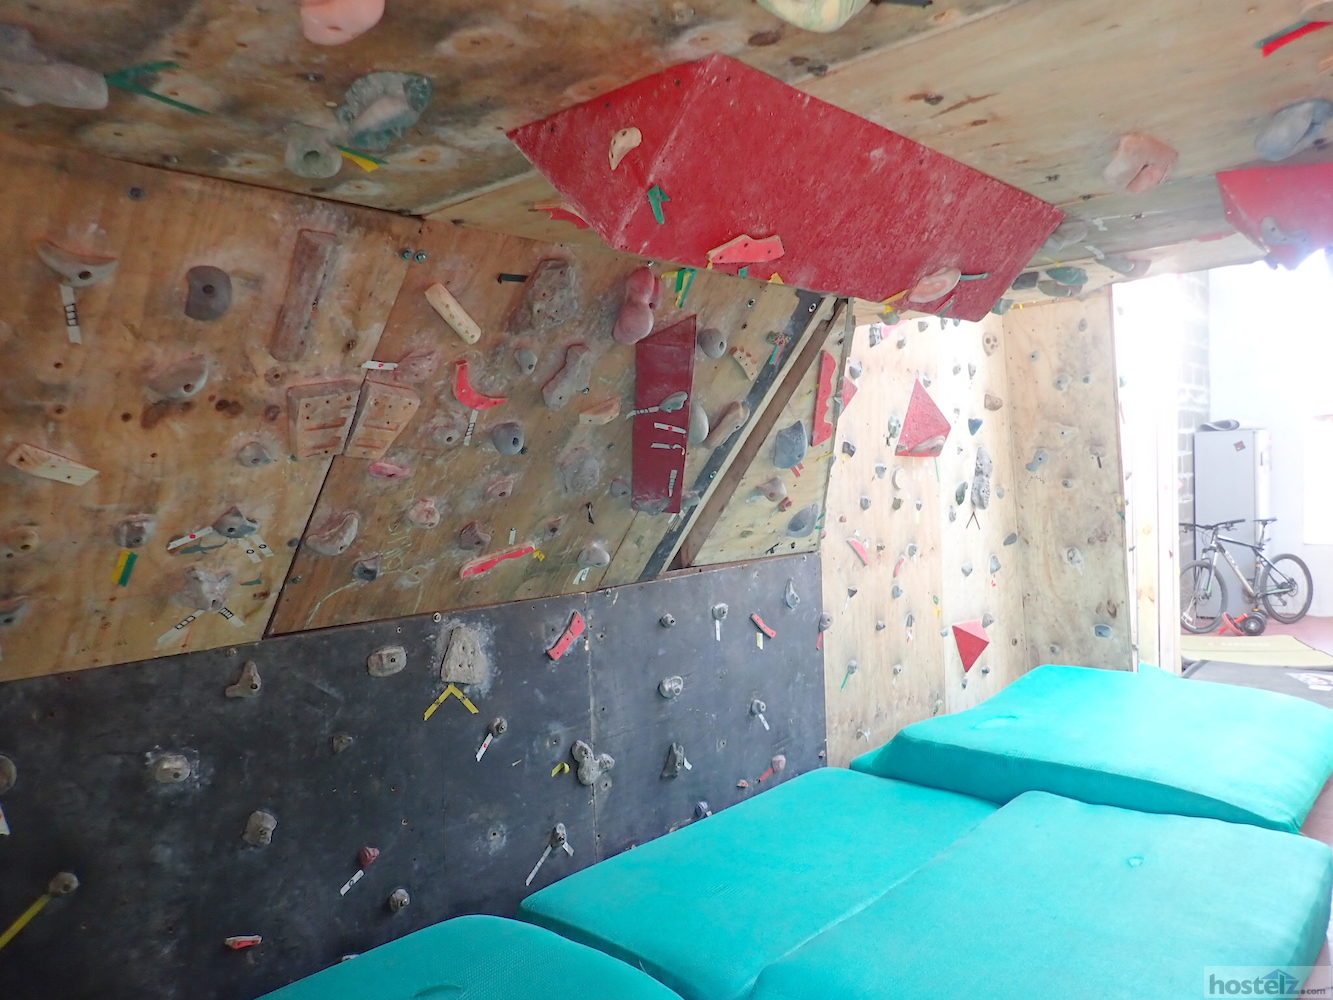 Bouldering wall which guests are free to use